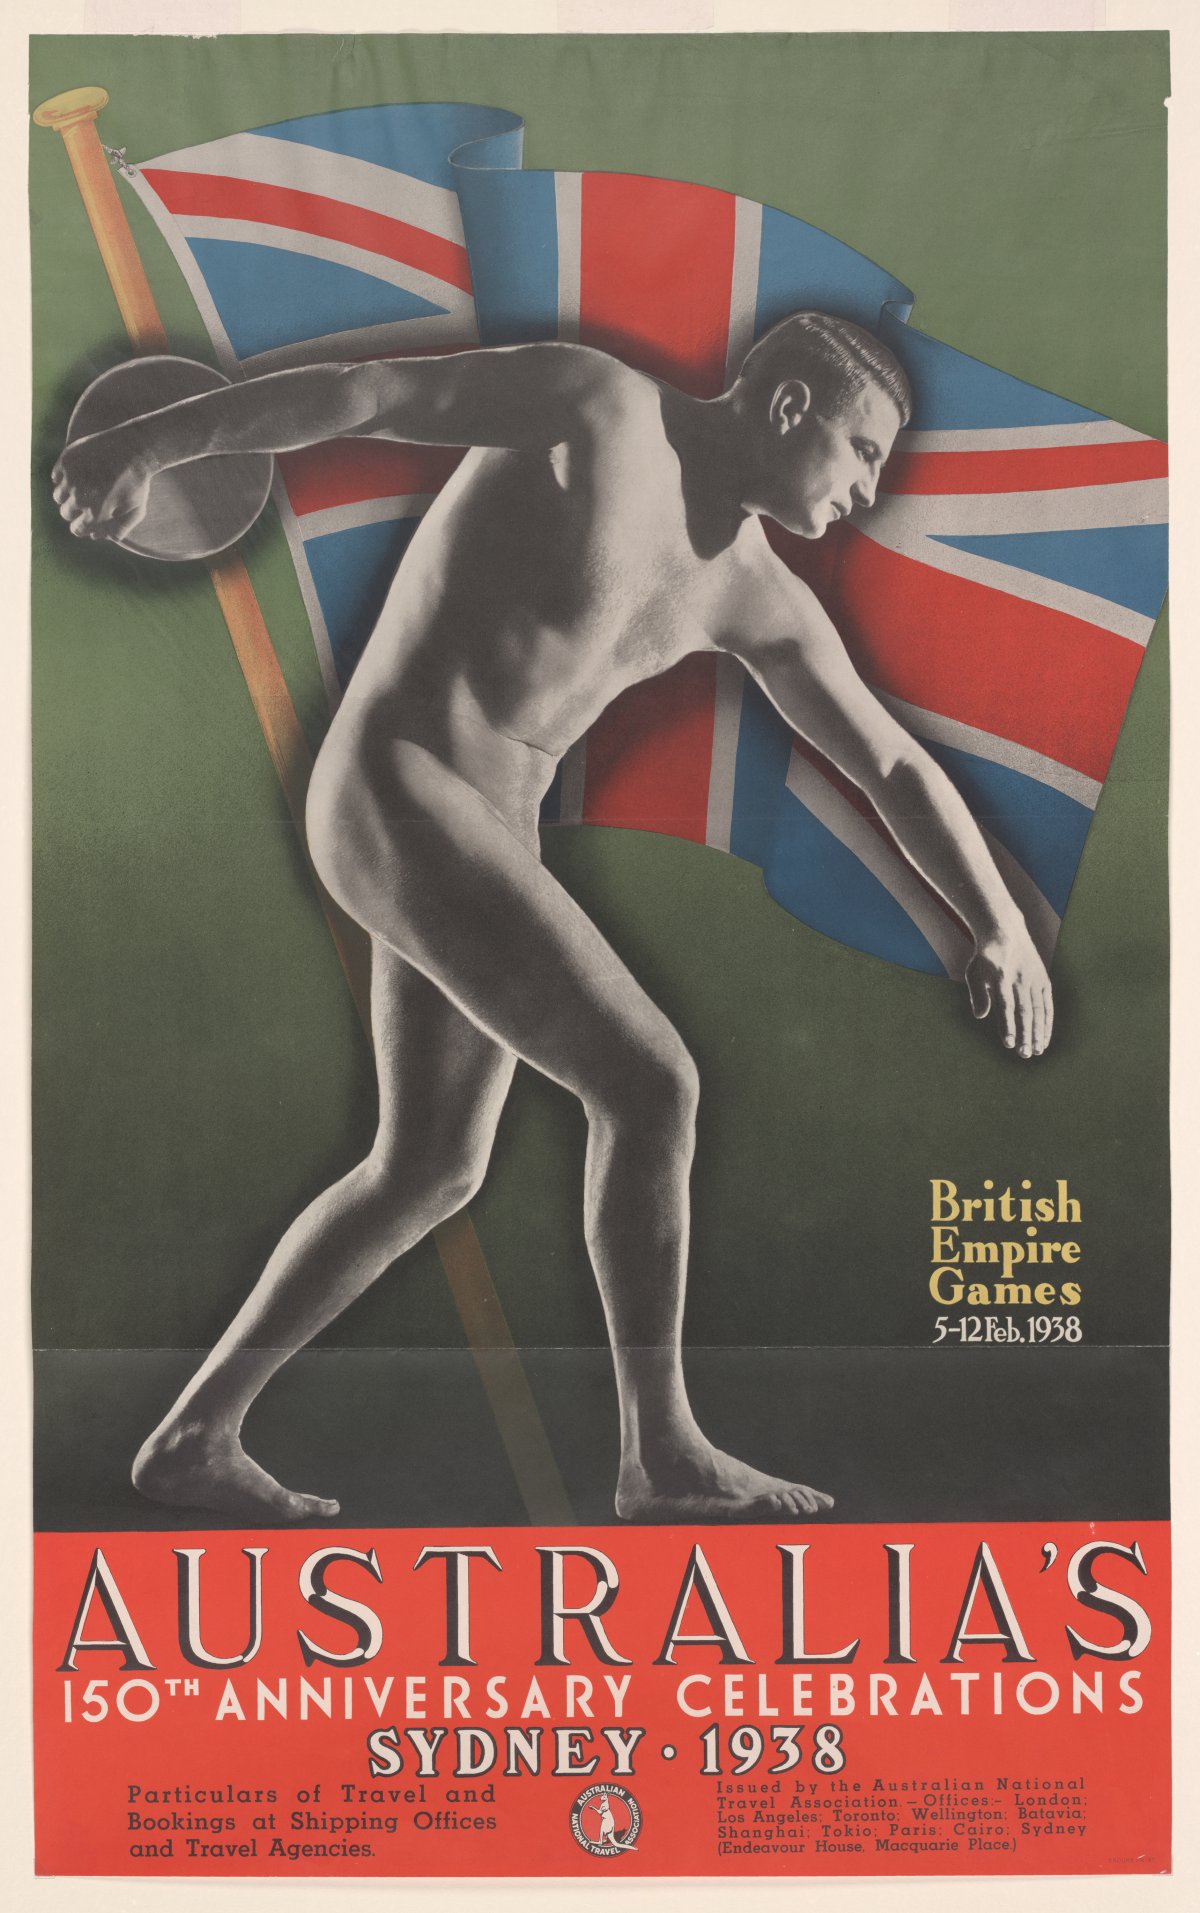 A large poster showing a naked man preparing to throw a discuss. Behind him is a Union Jack on a green background. There is a red strip along the bottom of the page with the words "Australia's 150th Anniversary Celebrations. Sydney 1938". In smaller writing next to the man is text saying "British Empire Games 5 to 12 Feb 1938